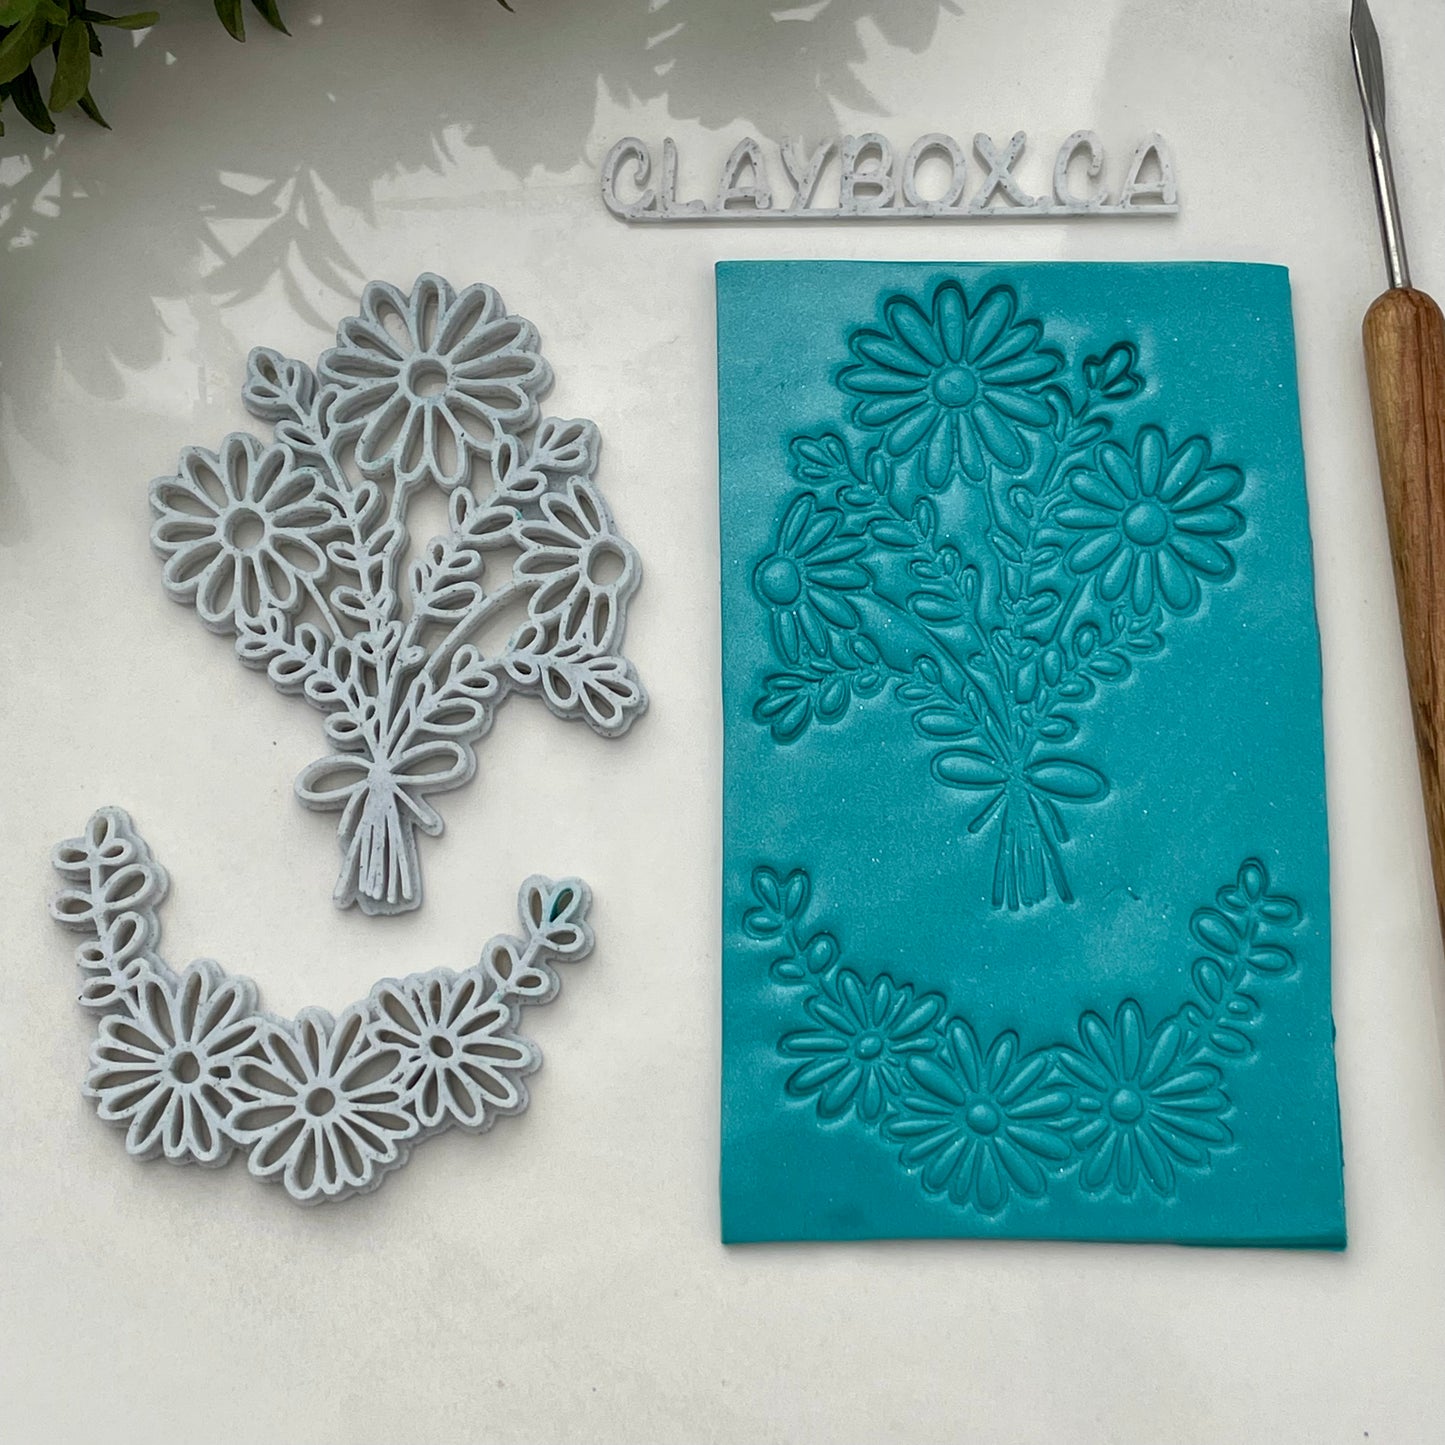 Chunky daisy stamps